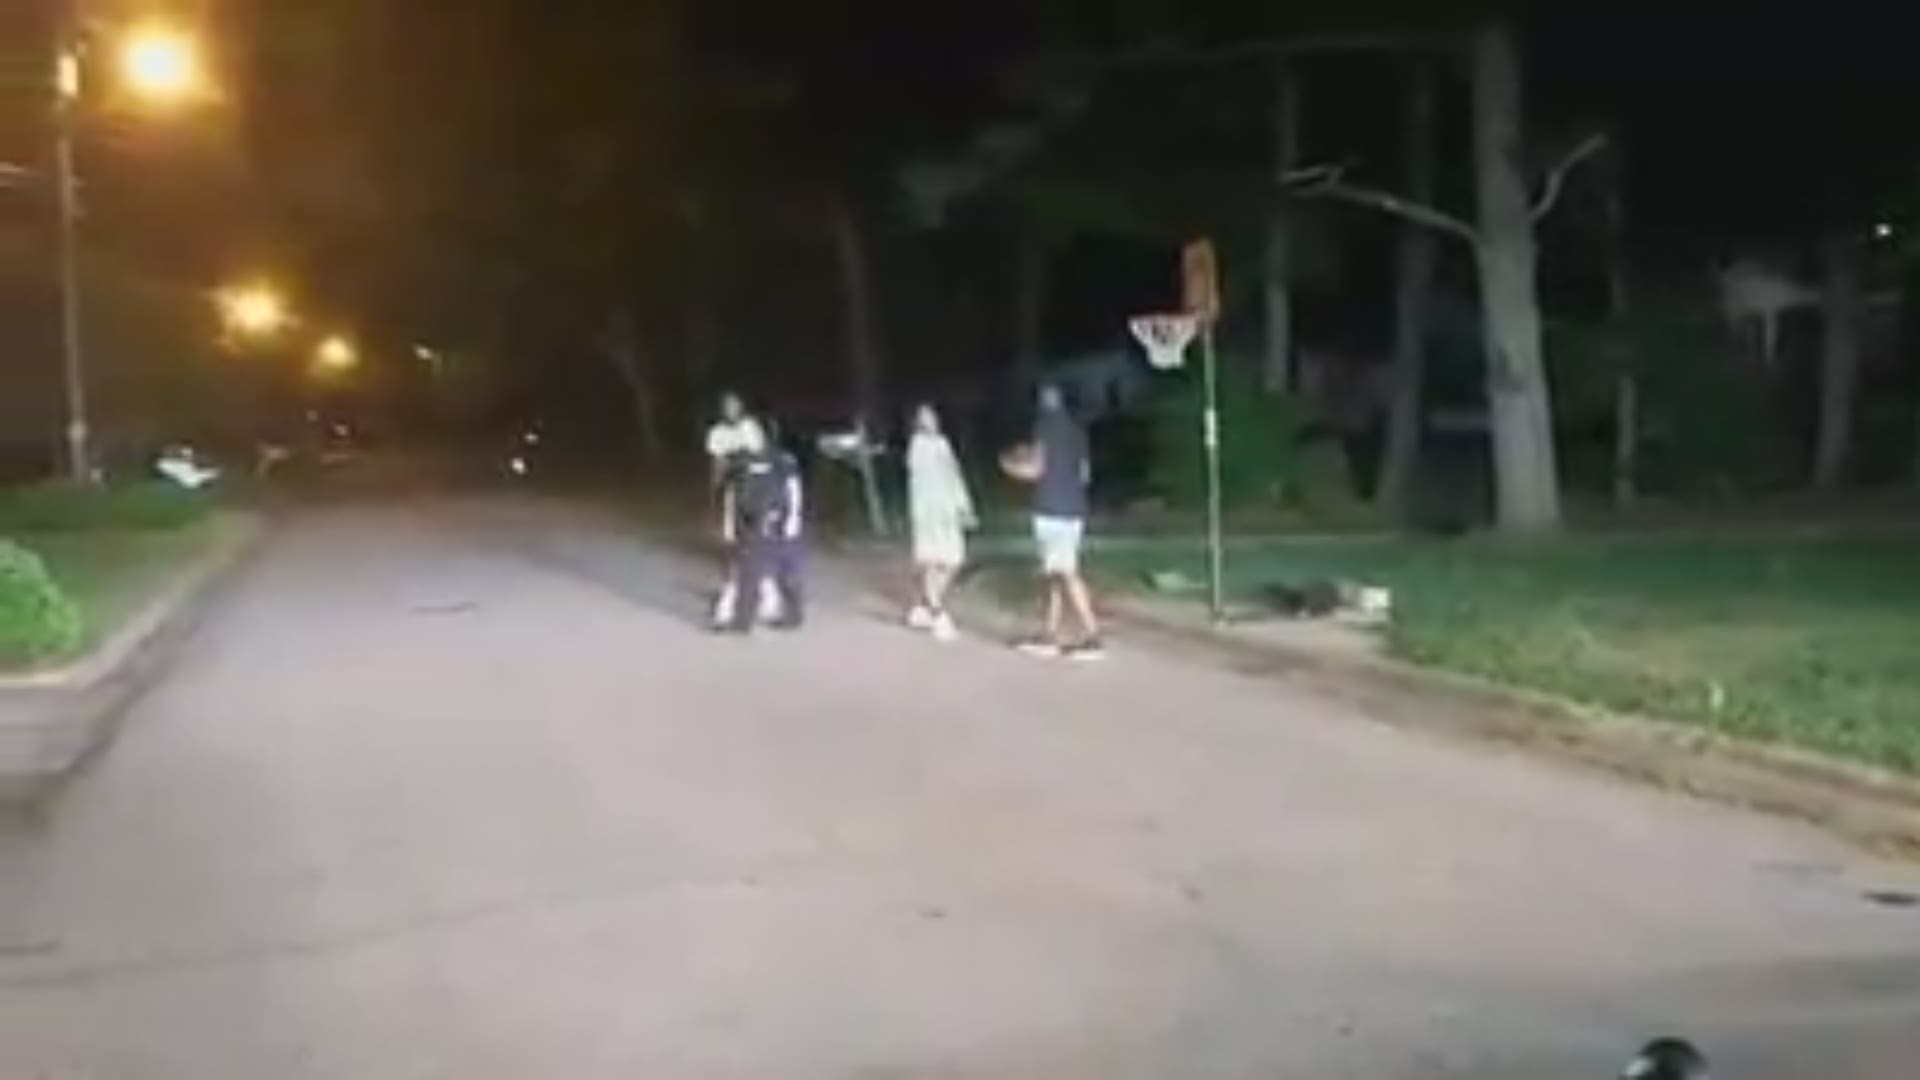 Cops called on Salisbury teens playing basketball. The officer let them finish if he could join in